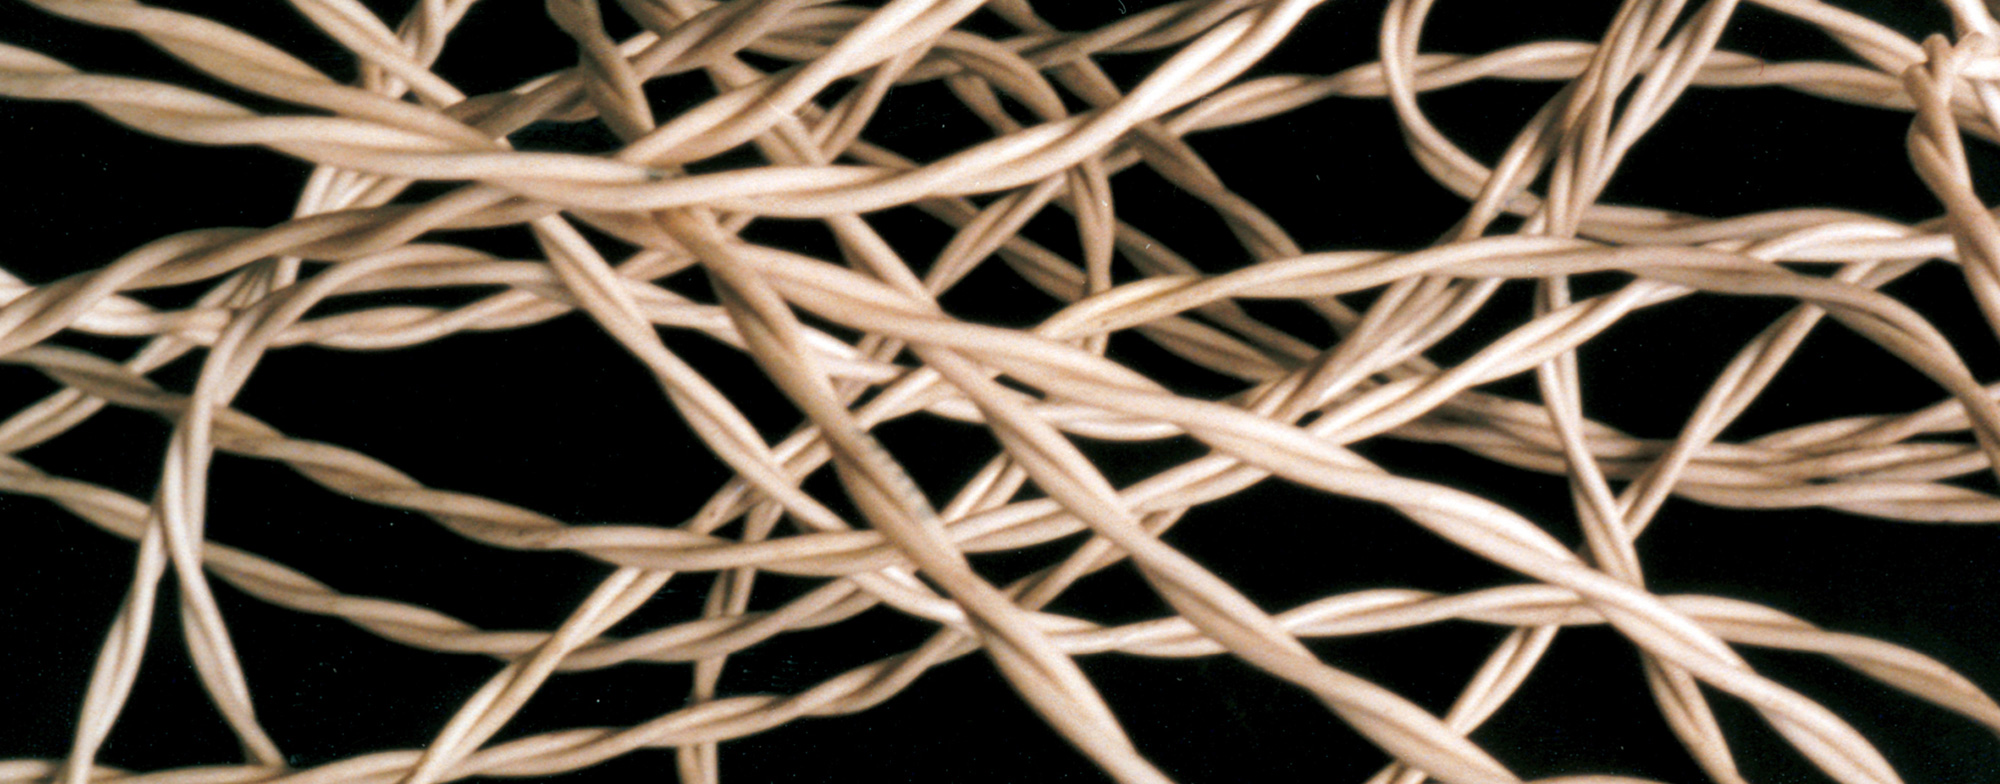 A photograph of Muzak wire from the 1950s.